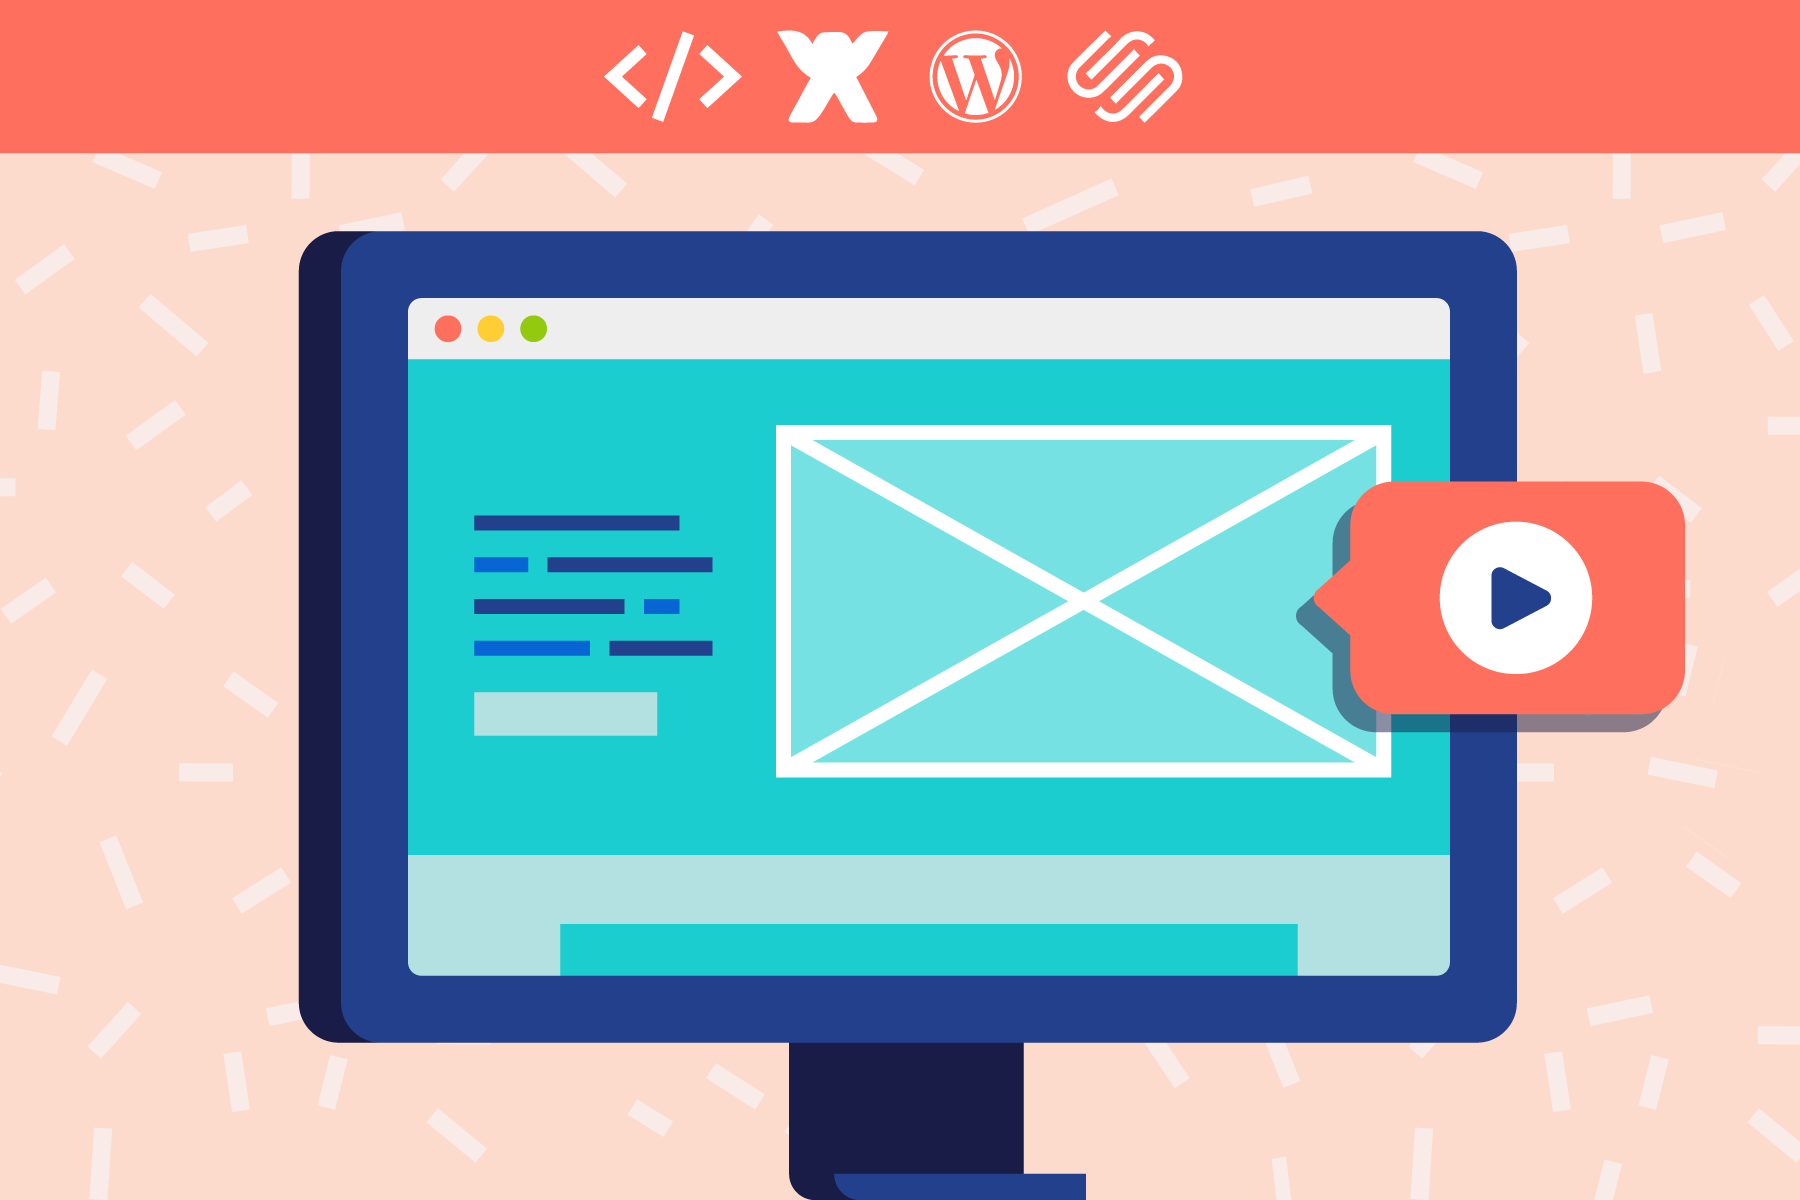 How to Embed Videos on a Website (Complete Guide) - Animoto